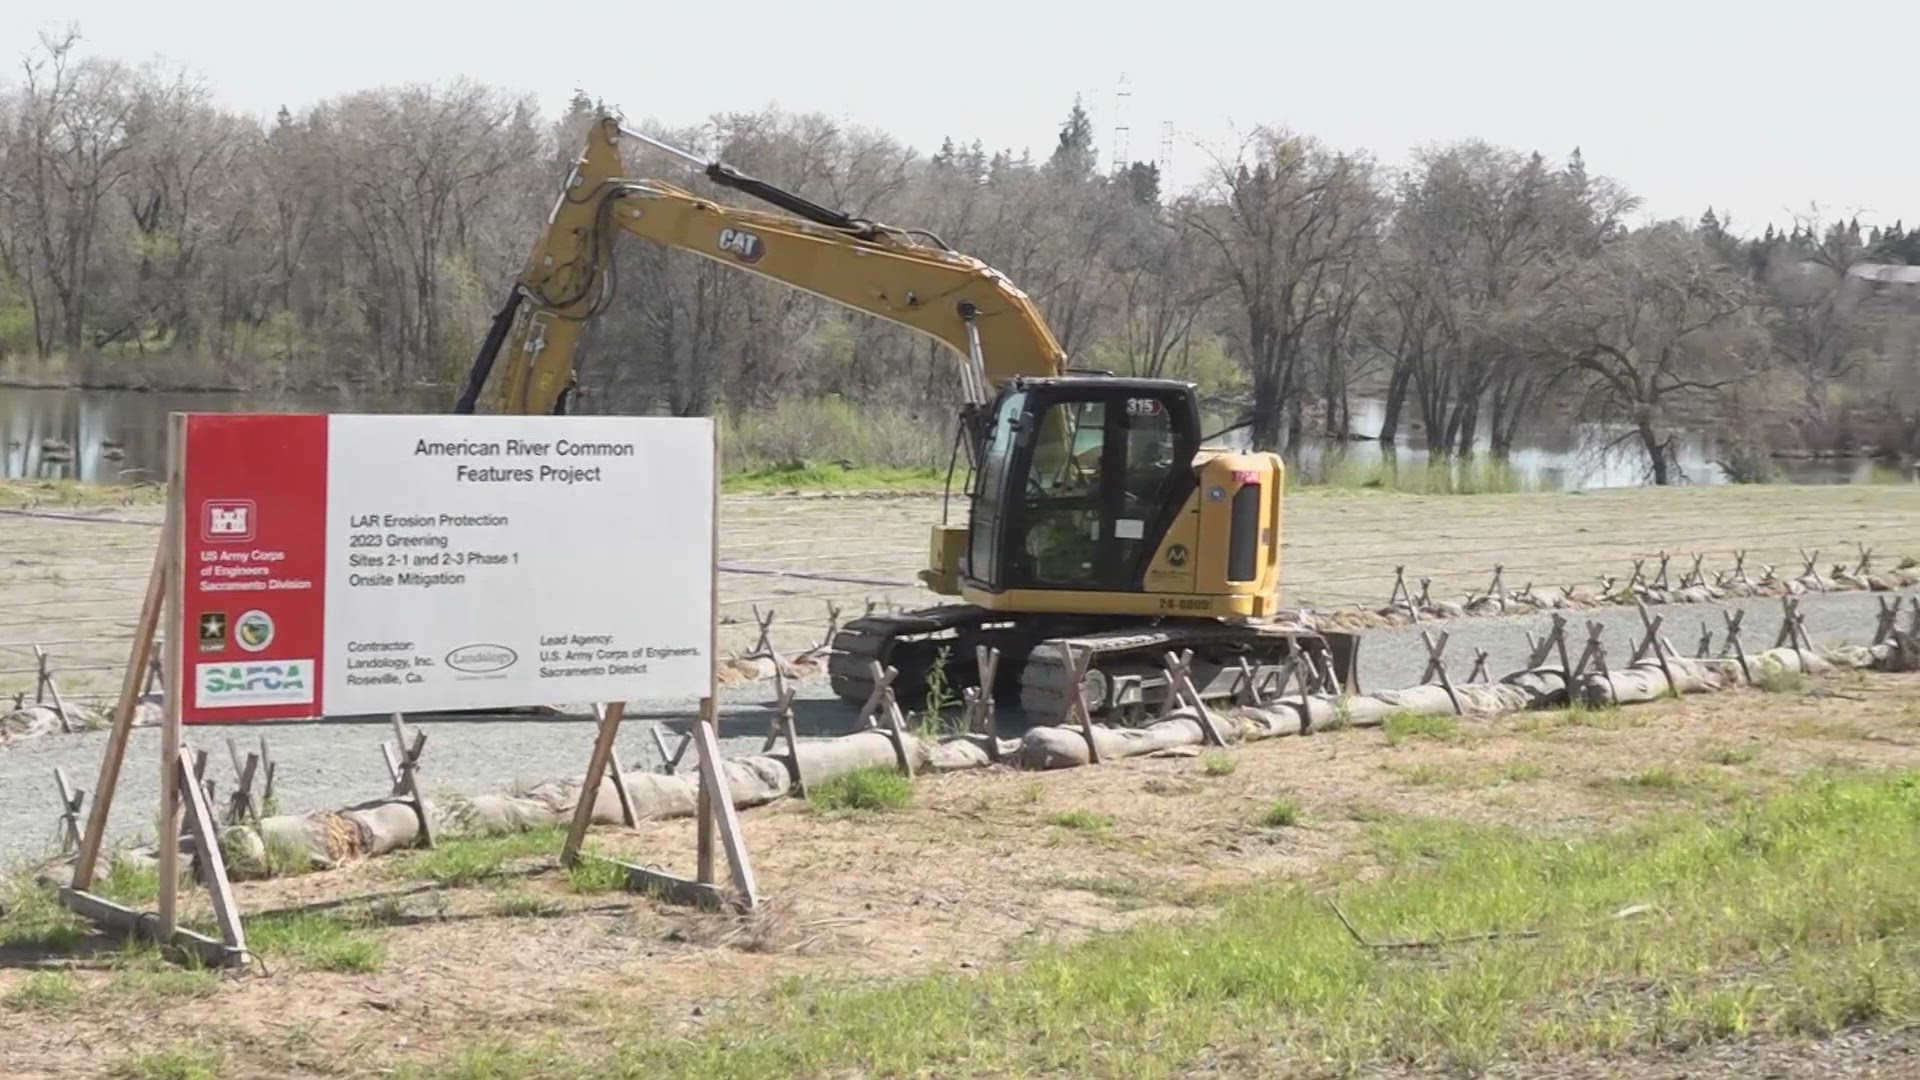 A new trail along the American River Parkway is in the works